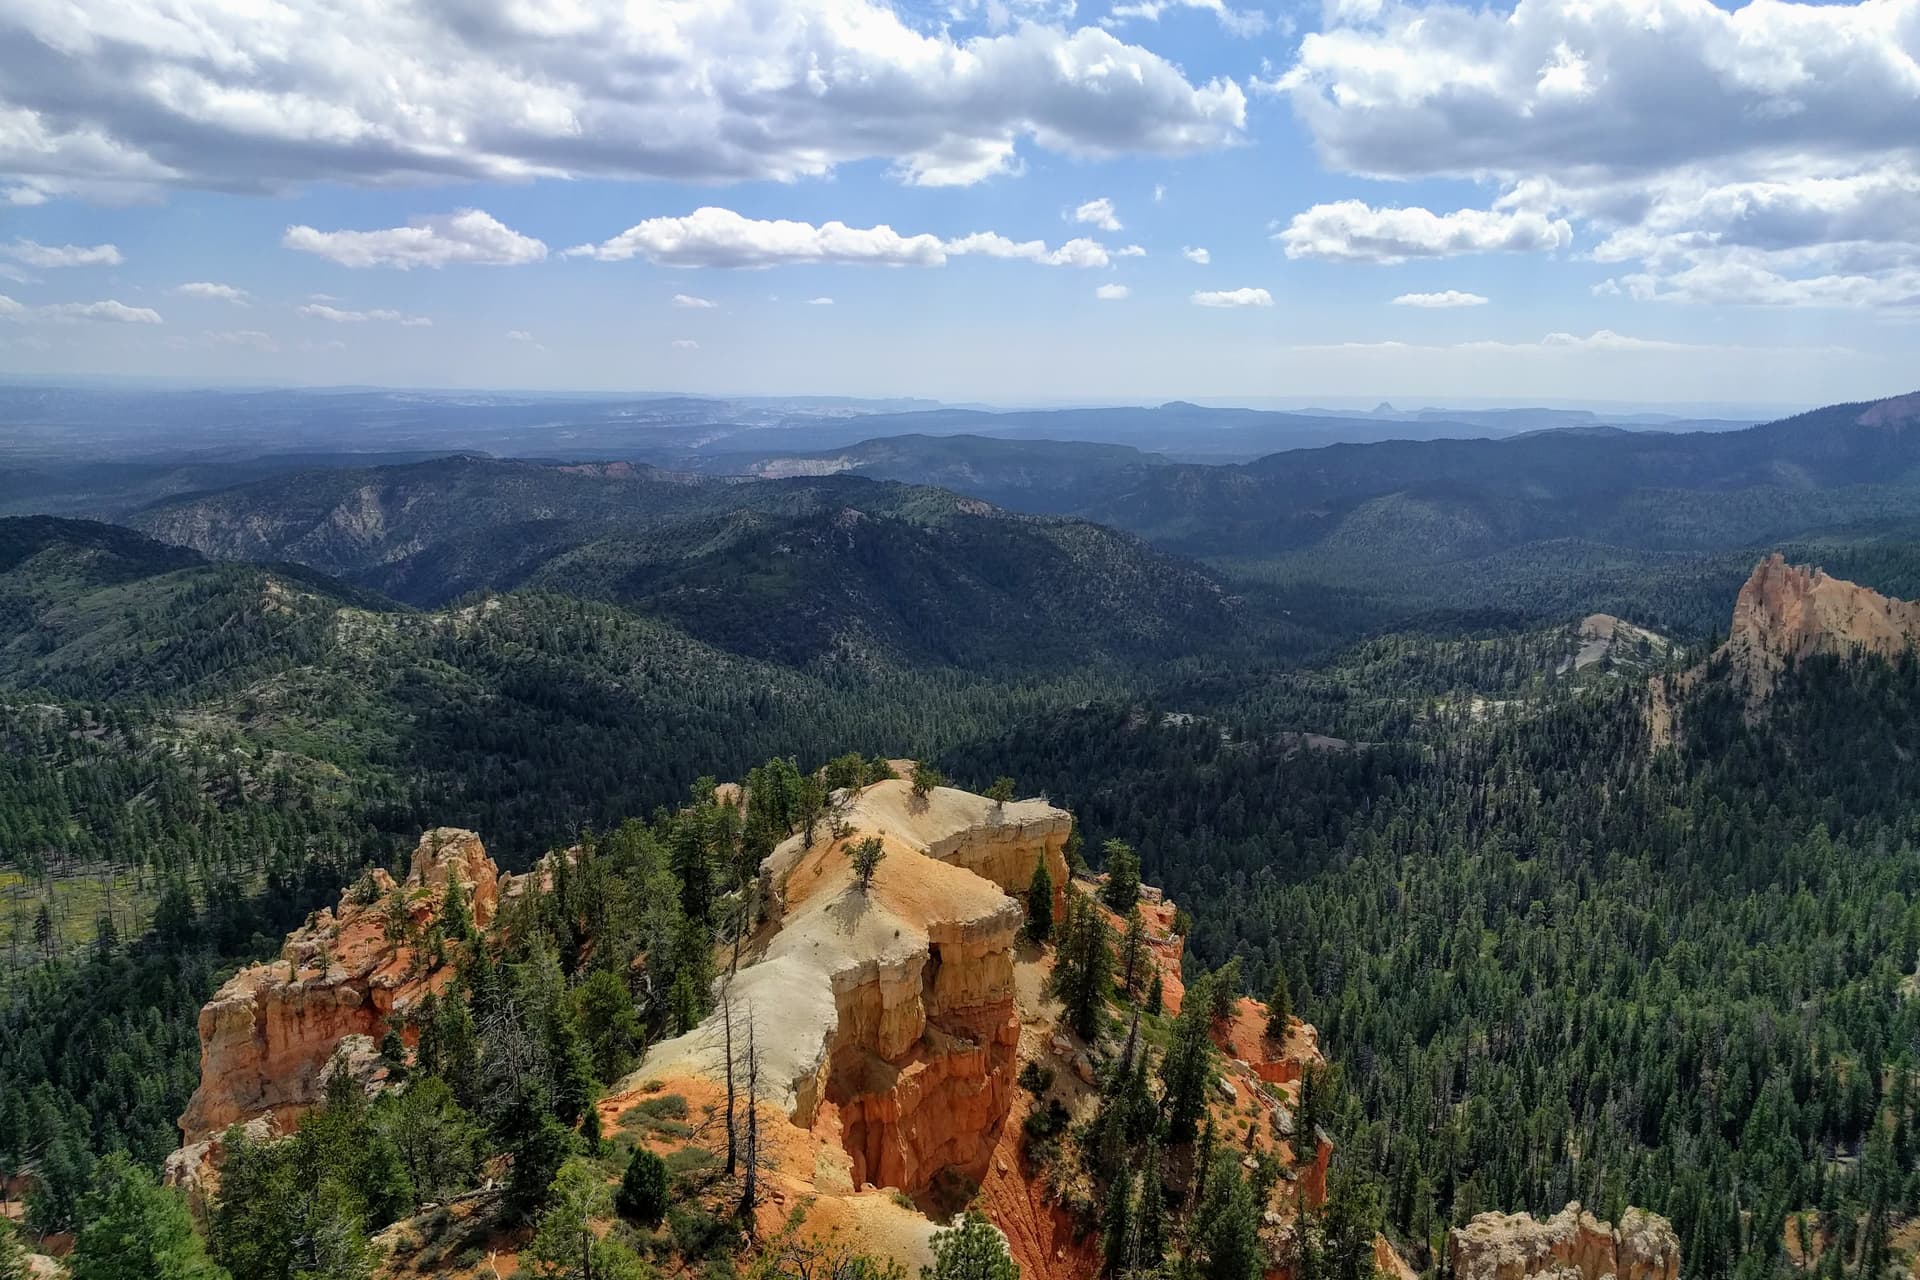 The view down an exceptionally wide fin of rock extending from the South Wall of Bryce Canyon. Beyond it, a pine forest stretches out to the horizon.